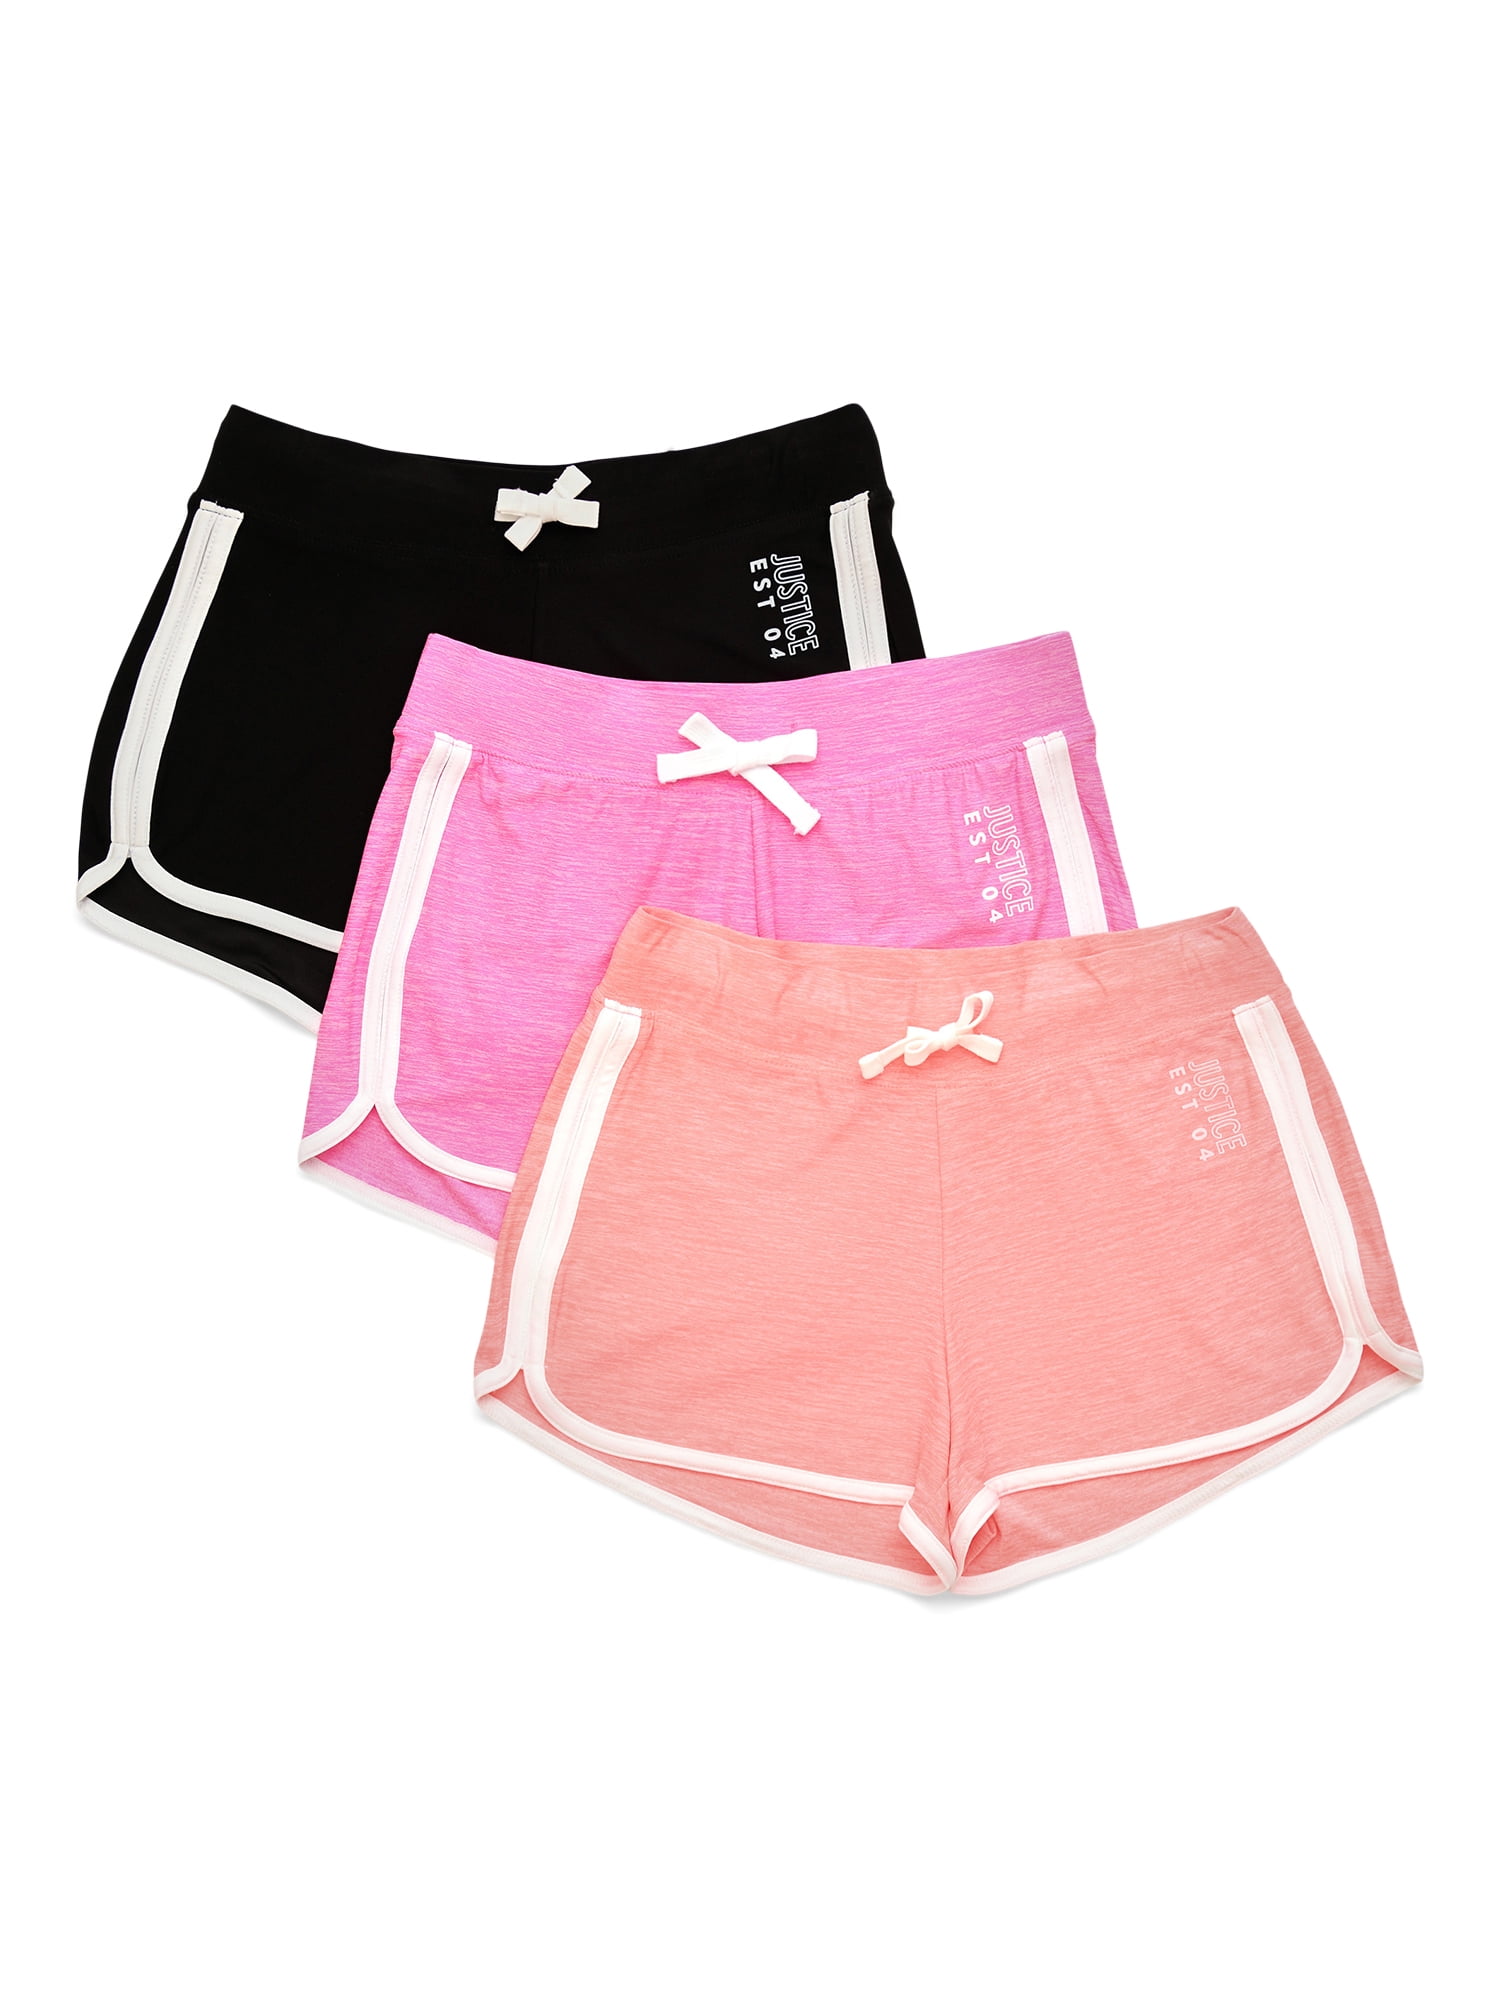 Girls 3 Pack Workout and Fashion Dolphin Shorts 